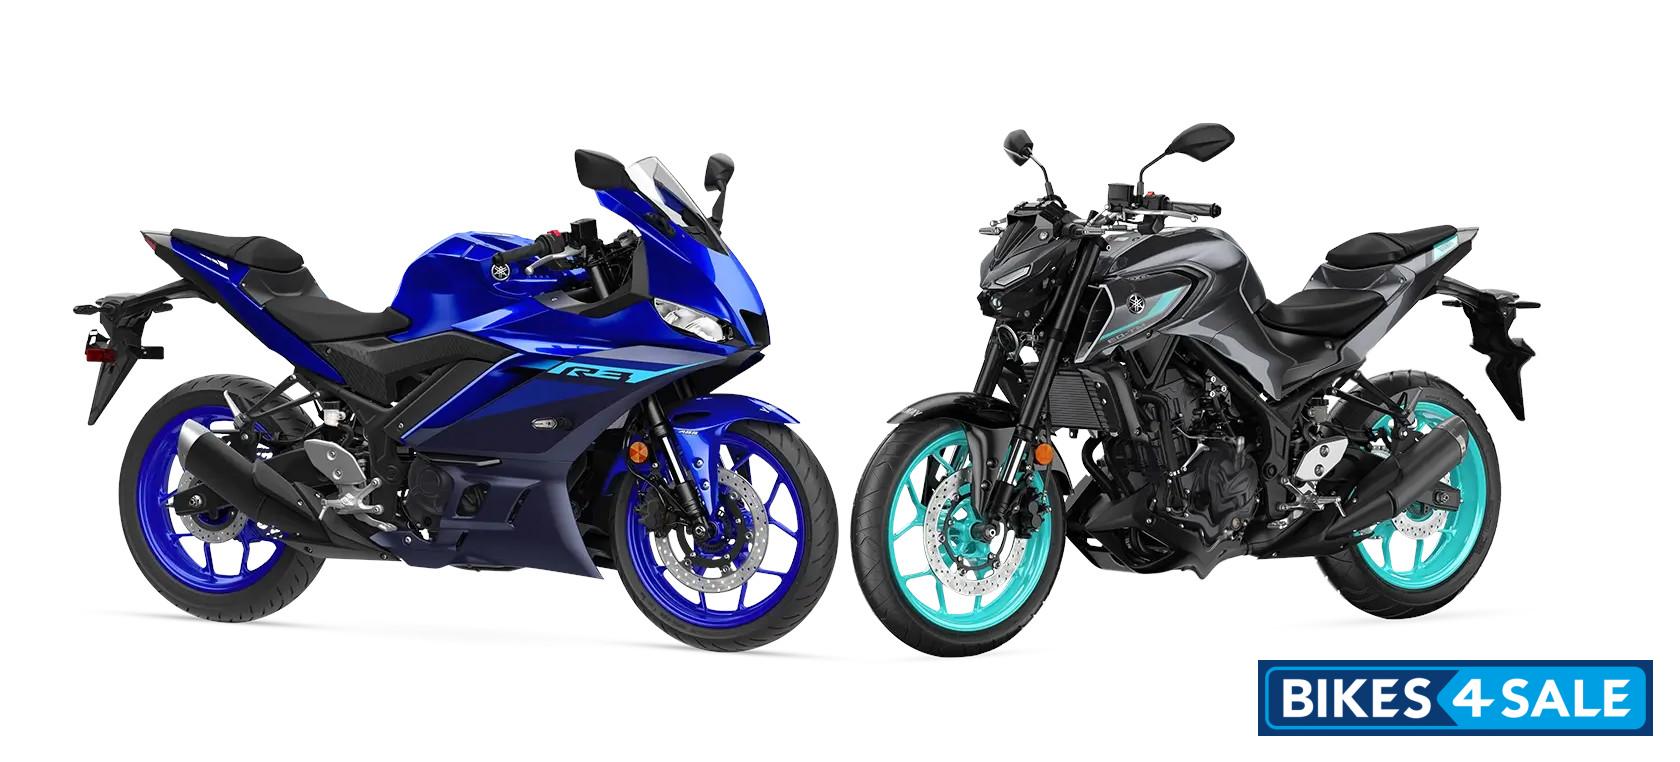 Yamaha R3 And Mt 03 Launched In India